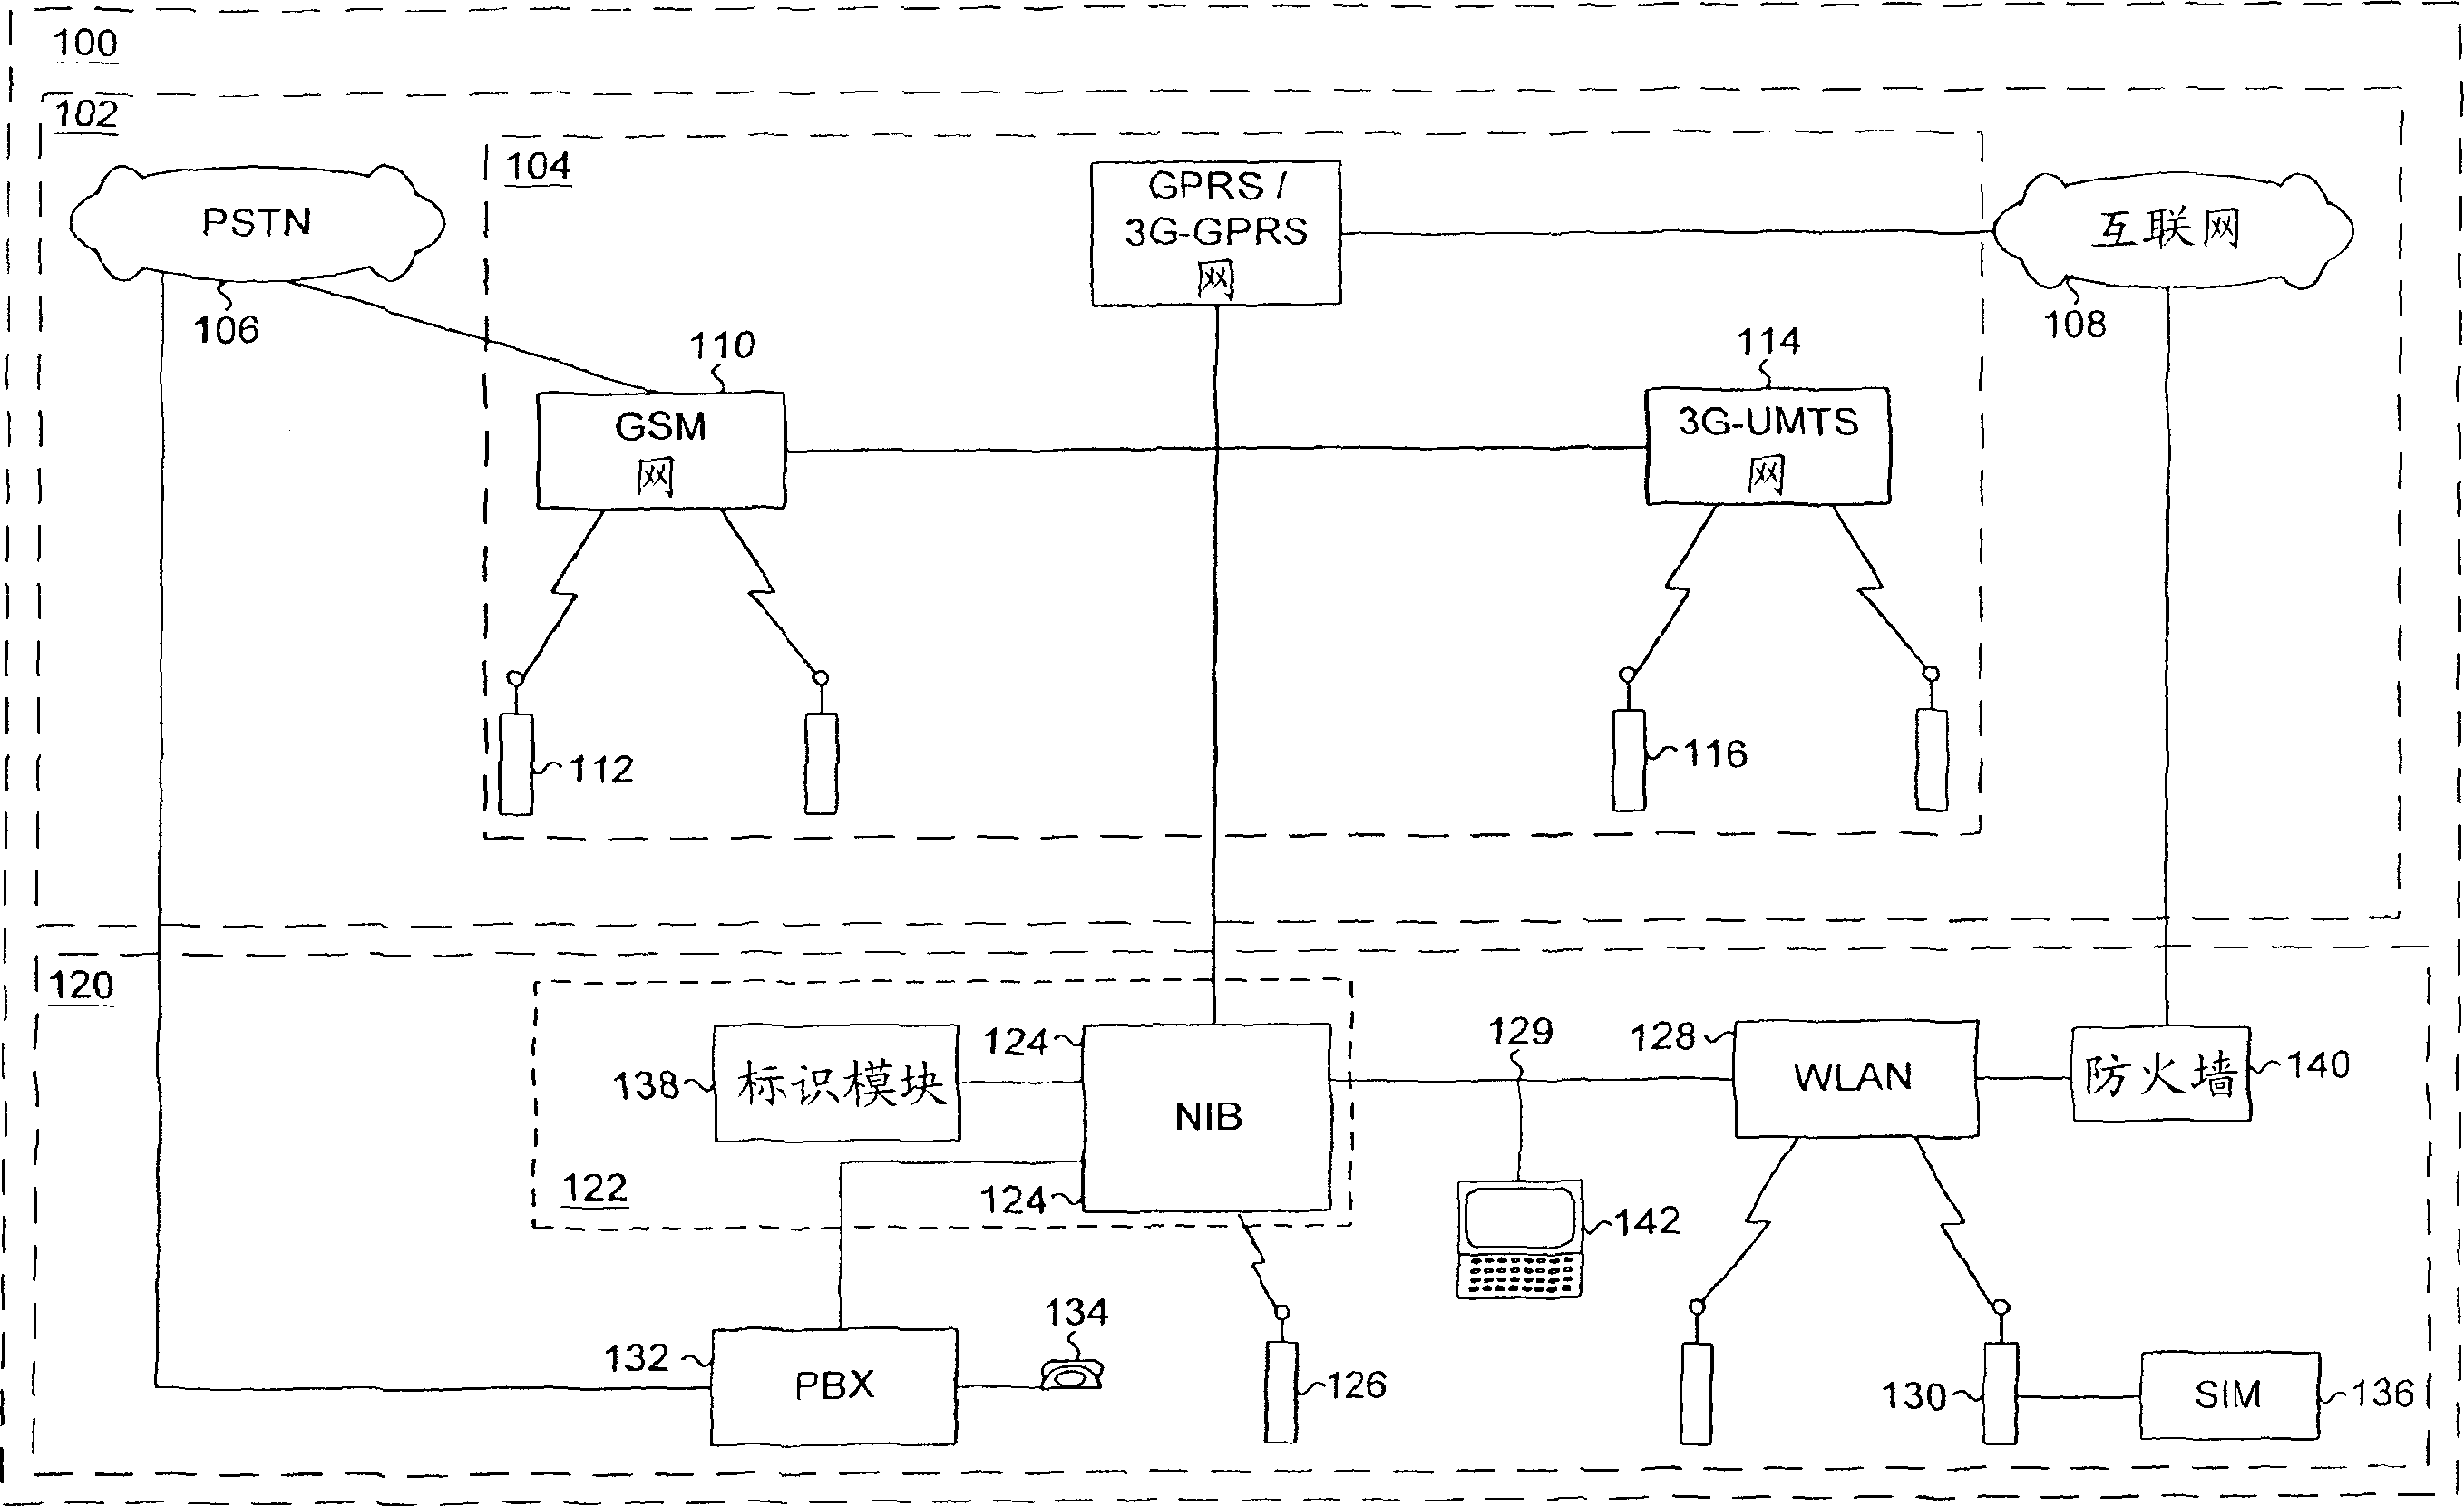 Cellular network with public network interface and local arer network expansion